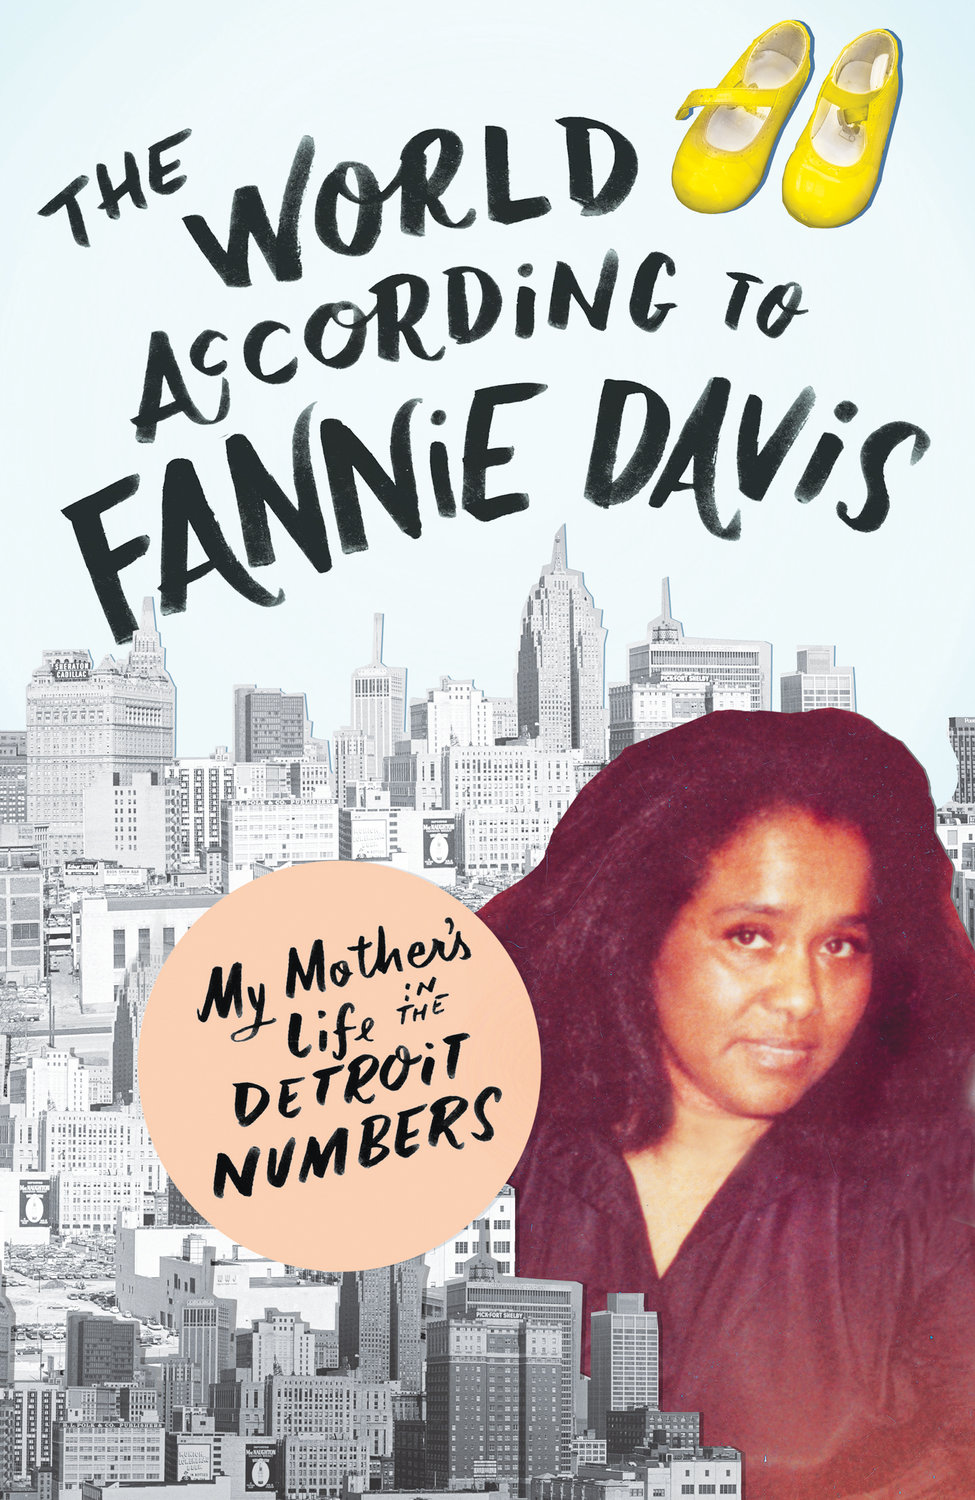 “The World According to Fannie Davis” is the recount of how the illegal numbers game impacted black communities.